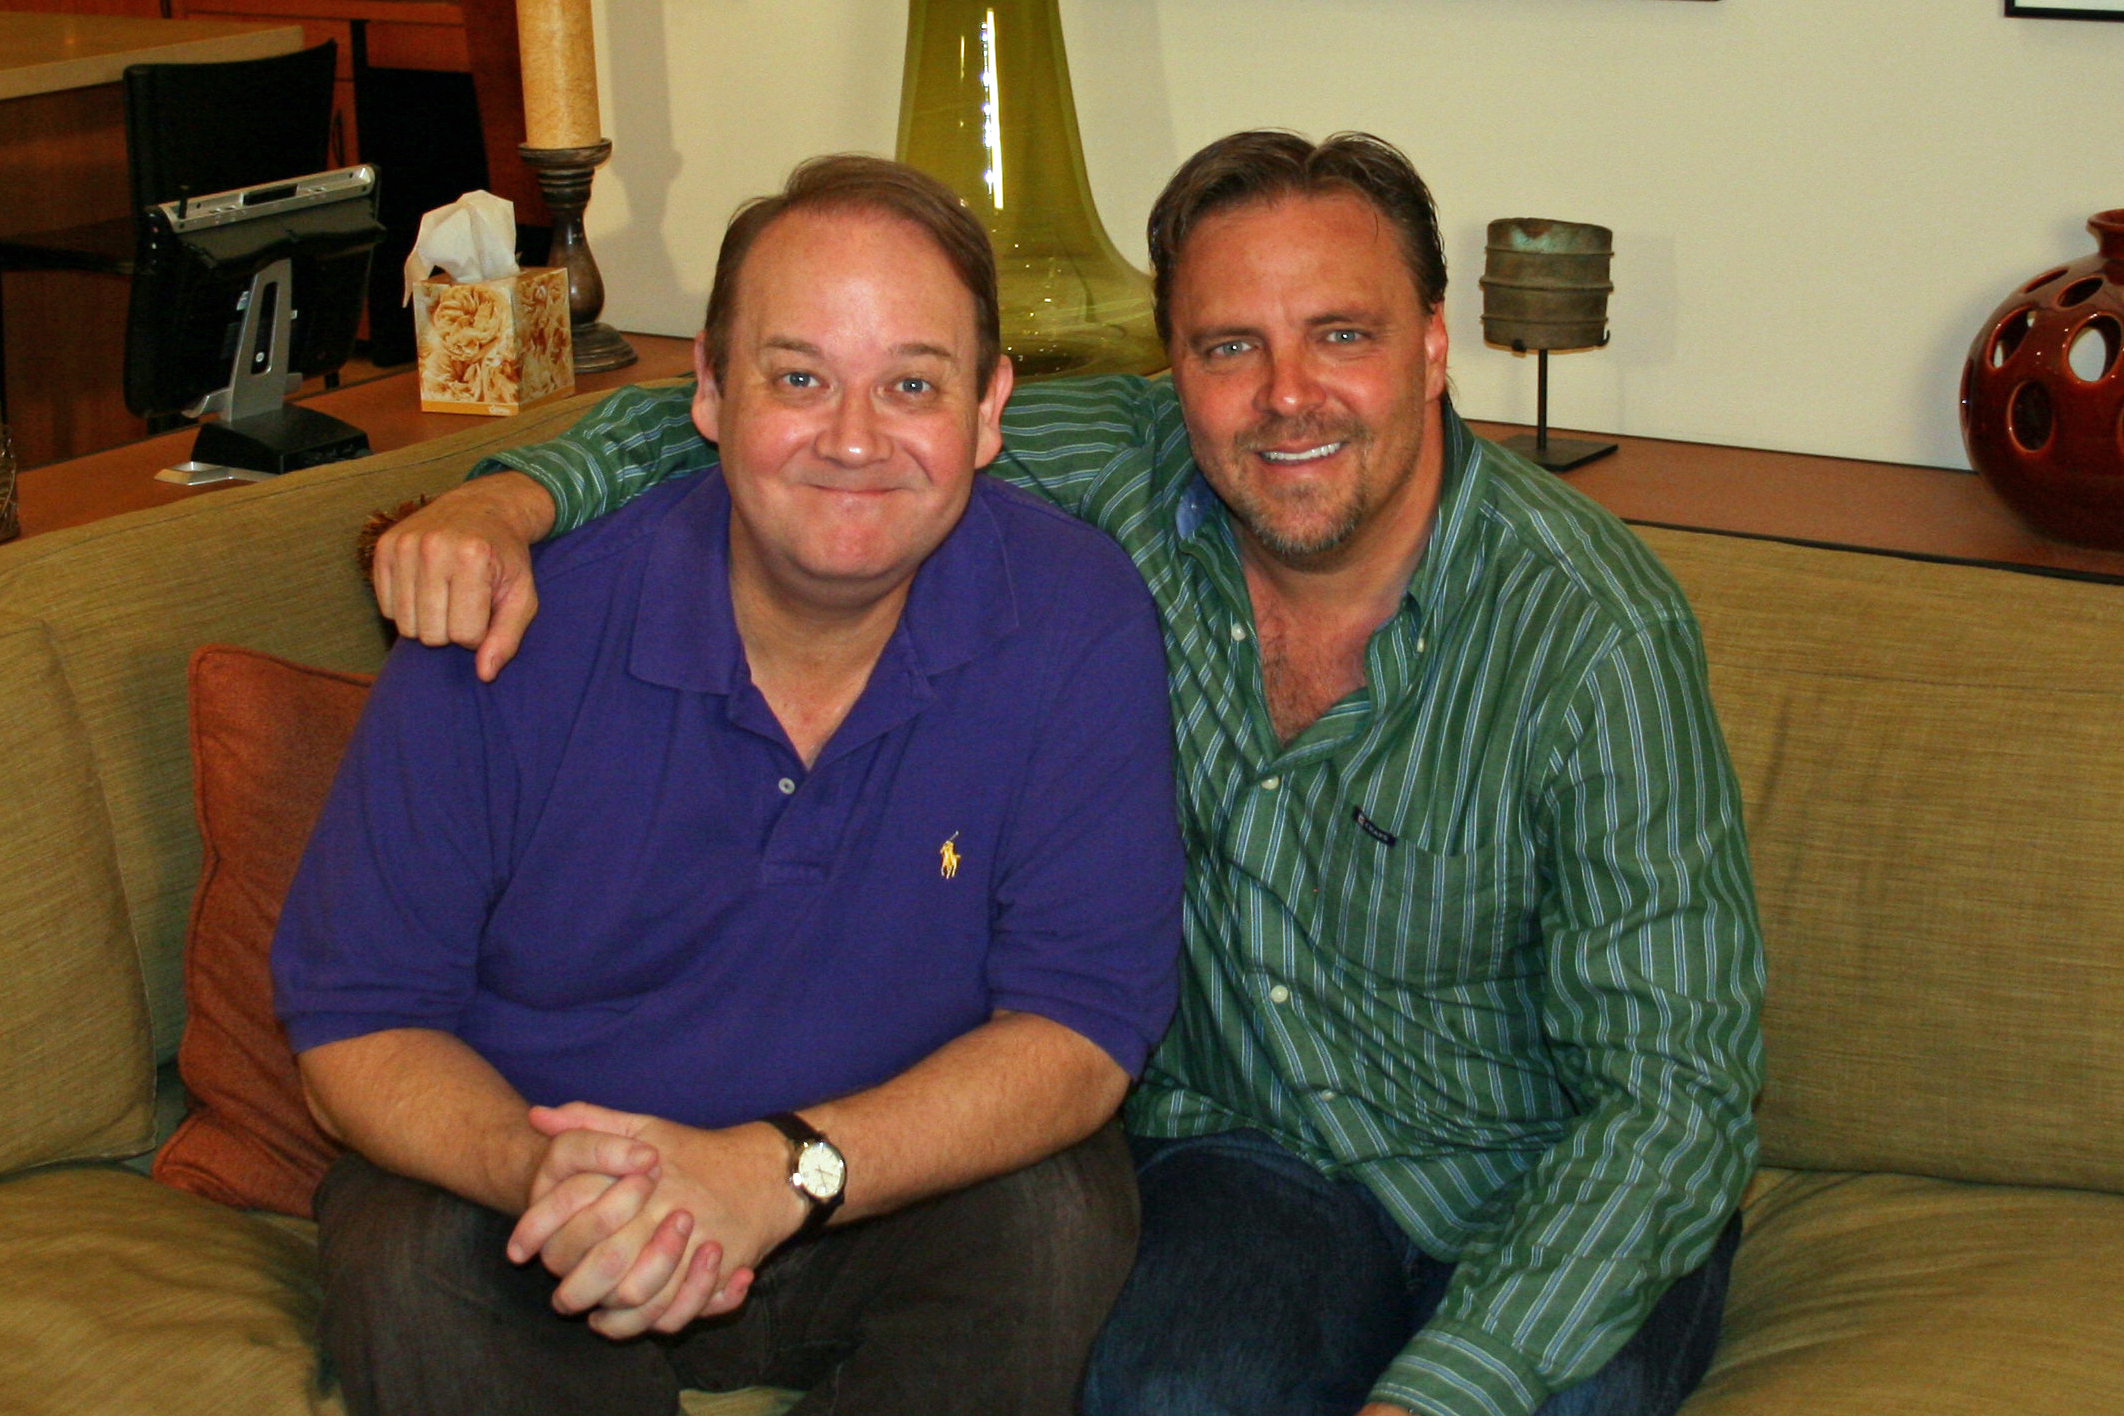 Michael Gier with Marc Cherry, creator and executive producer of Desperate Housewives.